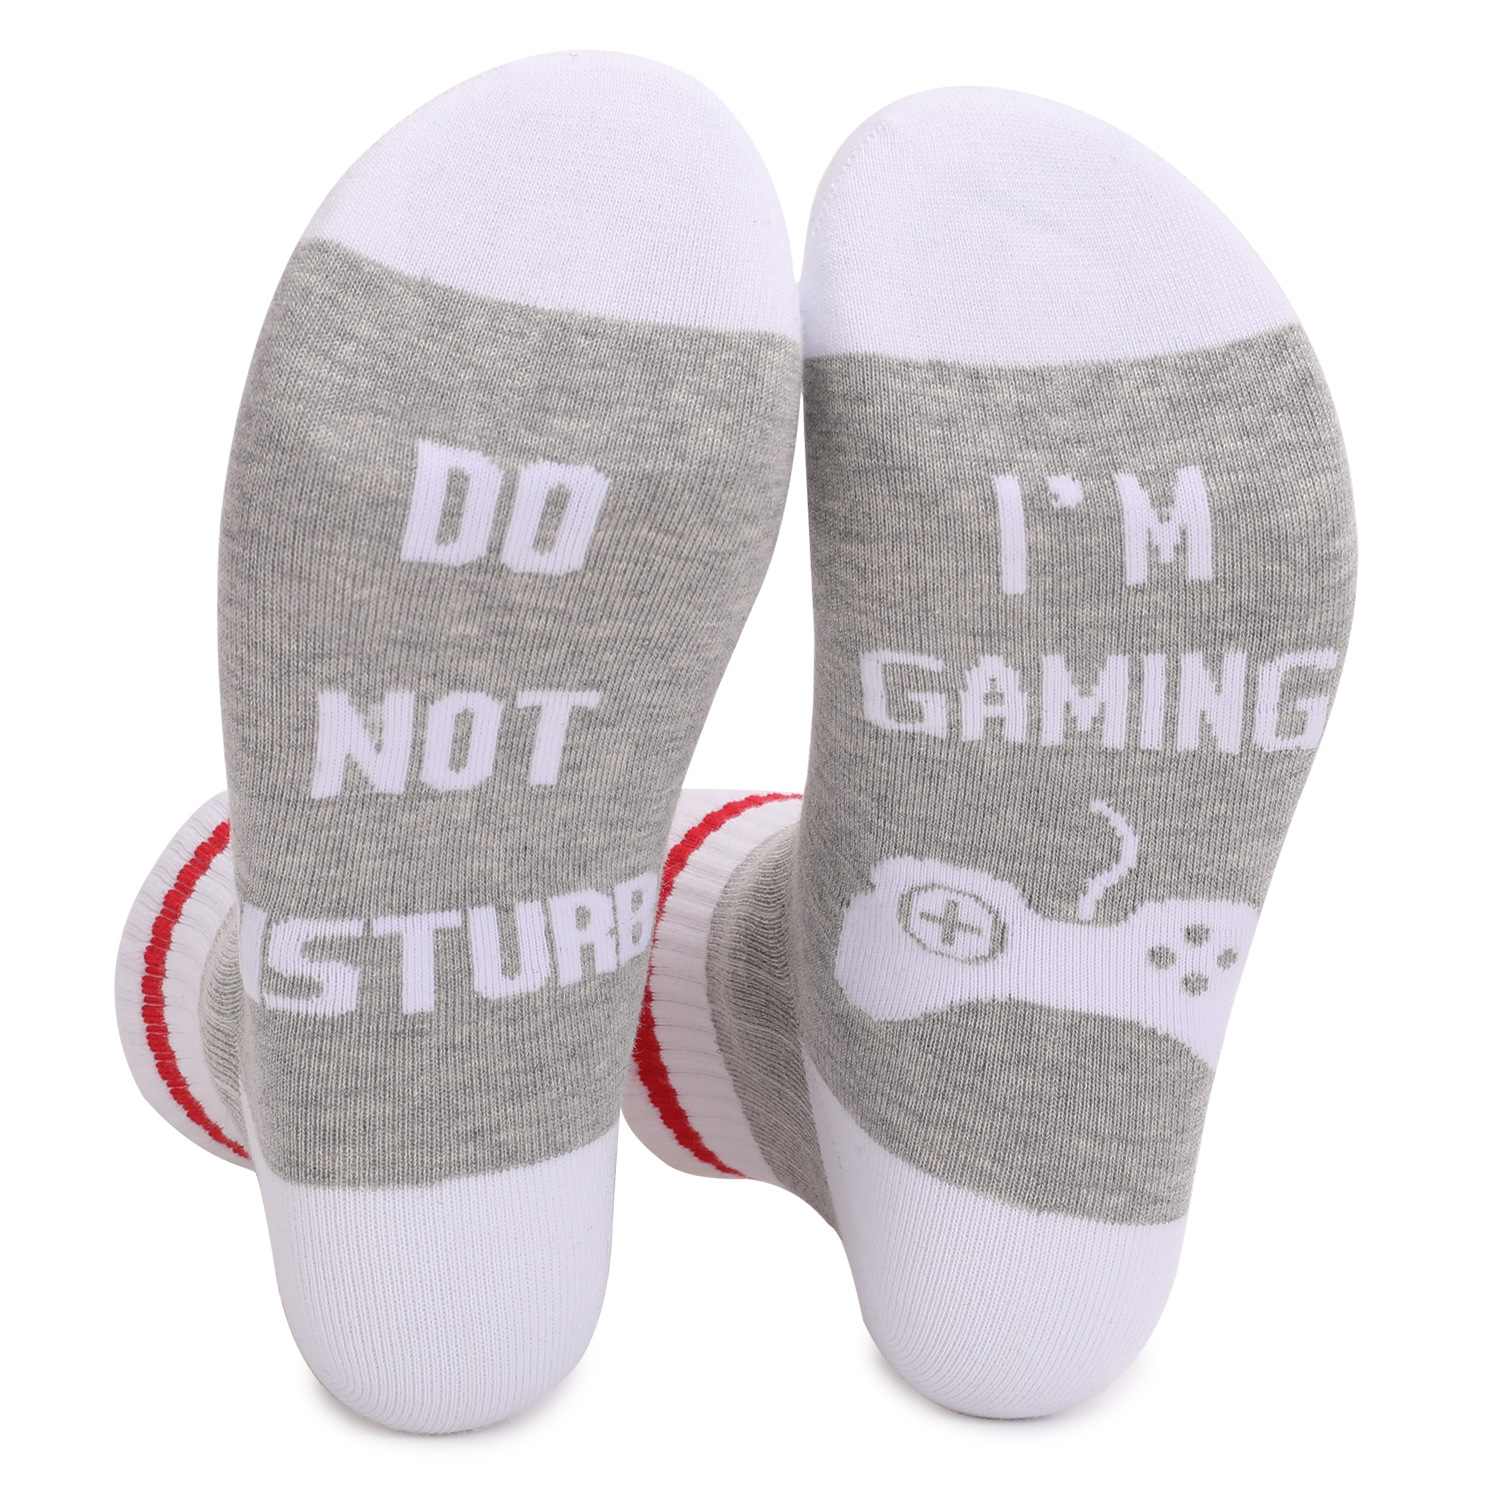 Do Not Disturb Letter Printing European and American Socks Autumn and Winter Men's Amazon Thickened Cotton Padded Mid-Calf Game Socks